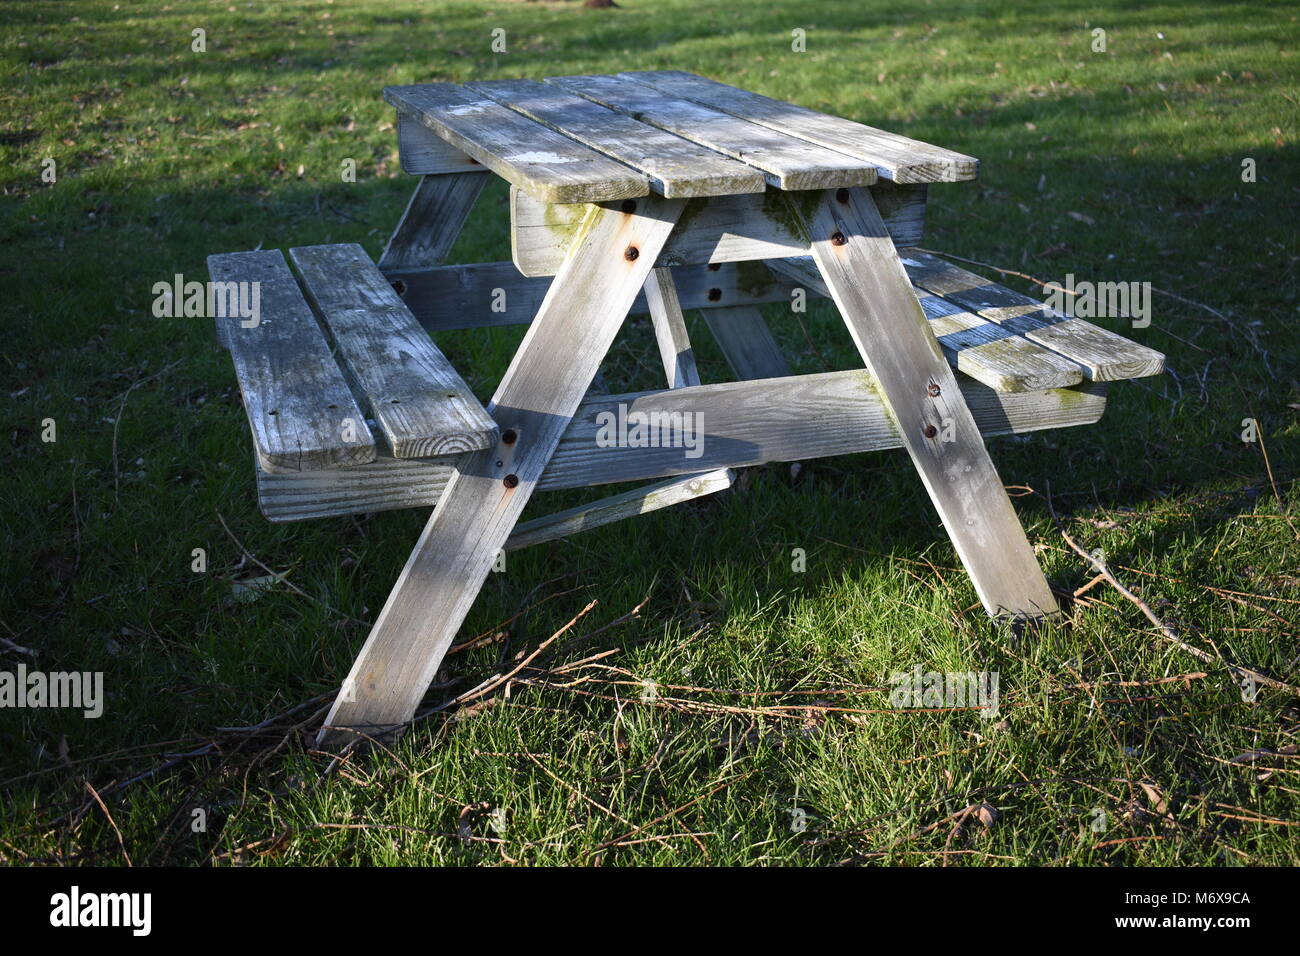 Worn wooden bench table in the shade of a tree Stock Photo